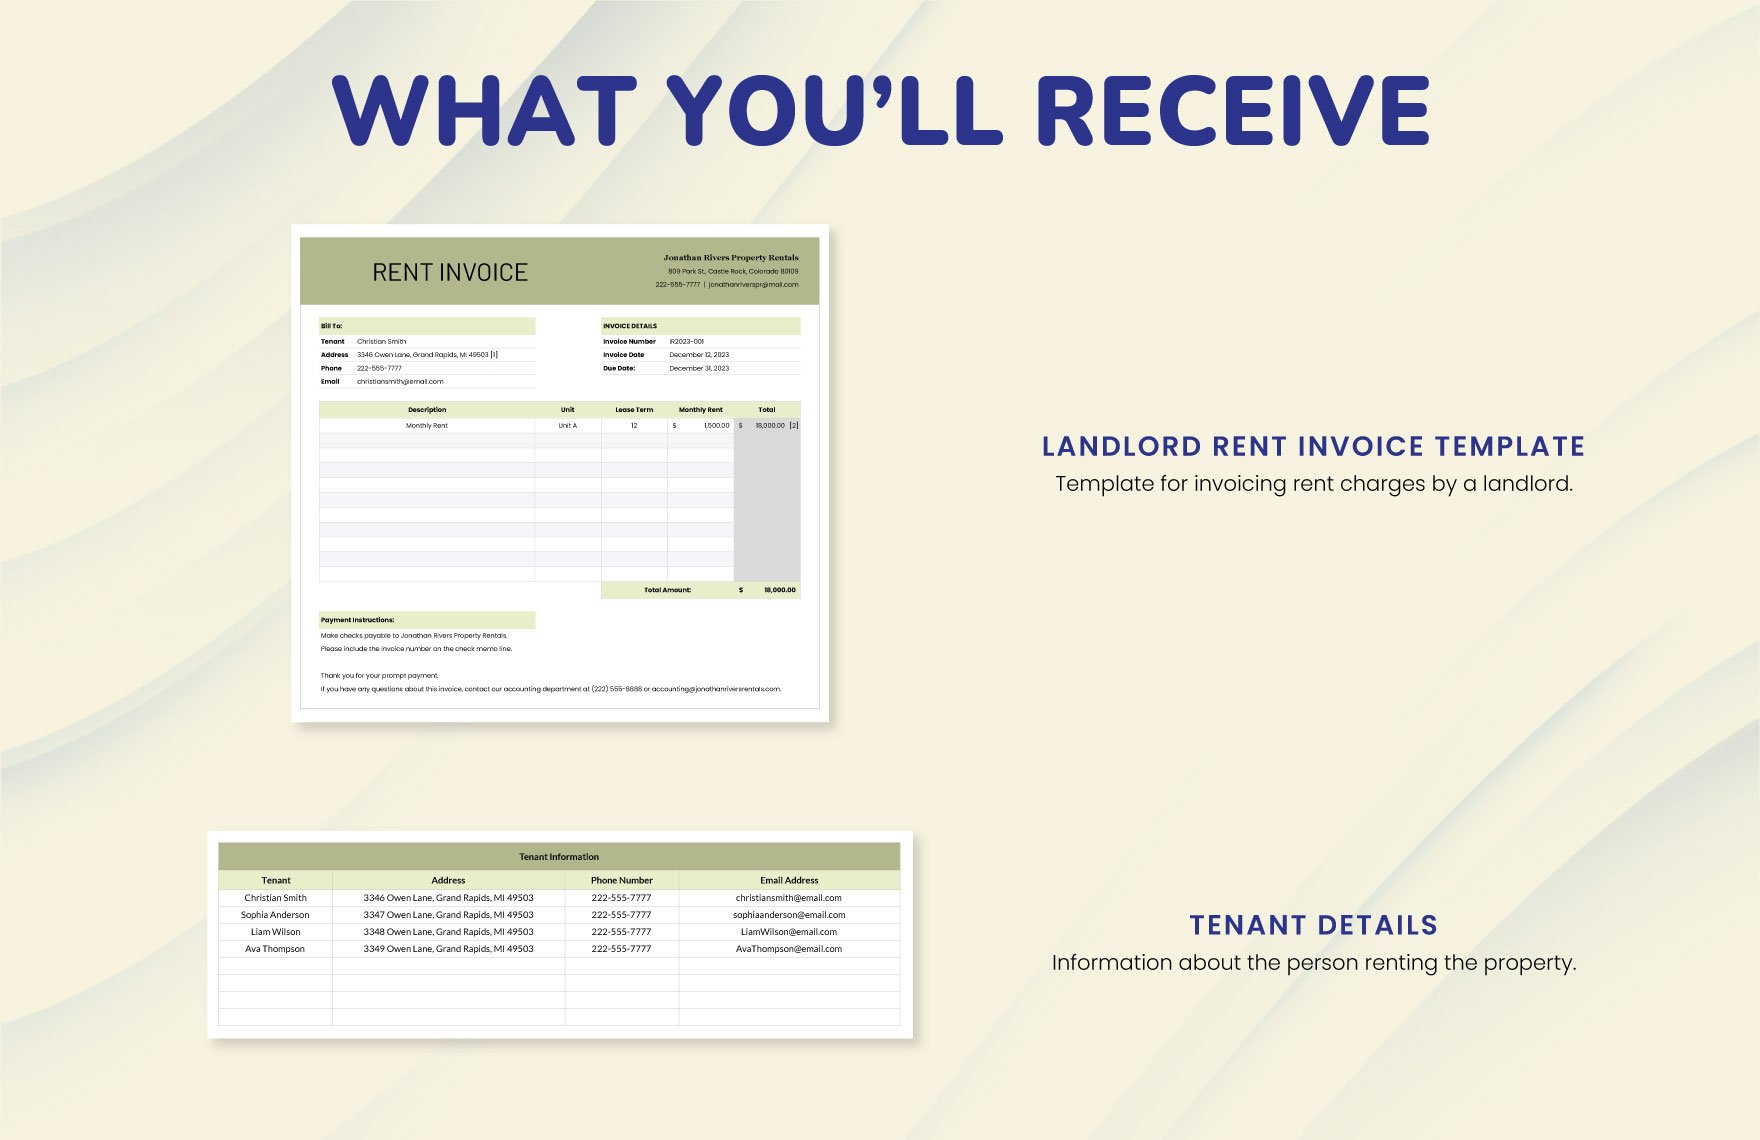 Landlord Rent Invoice Template